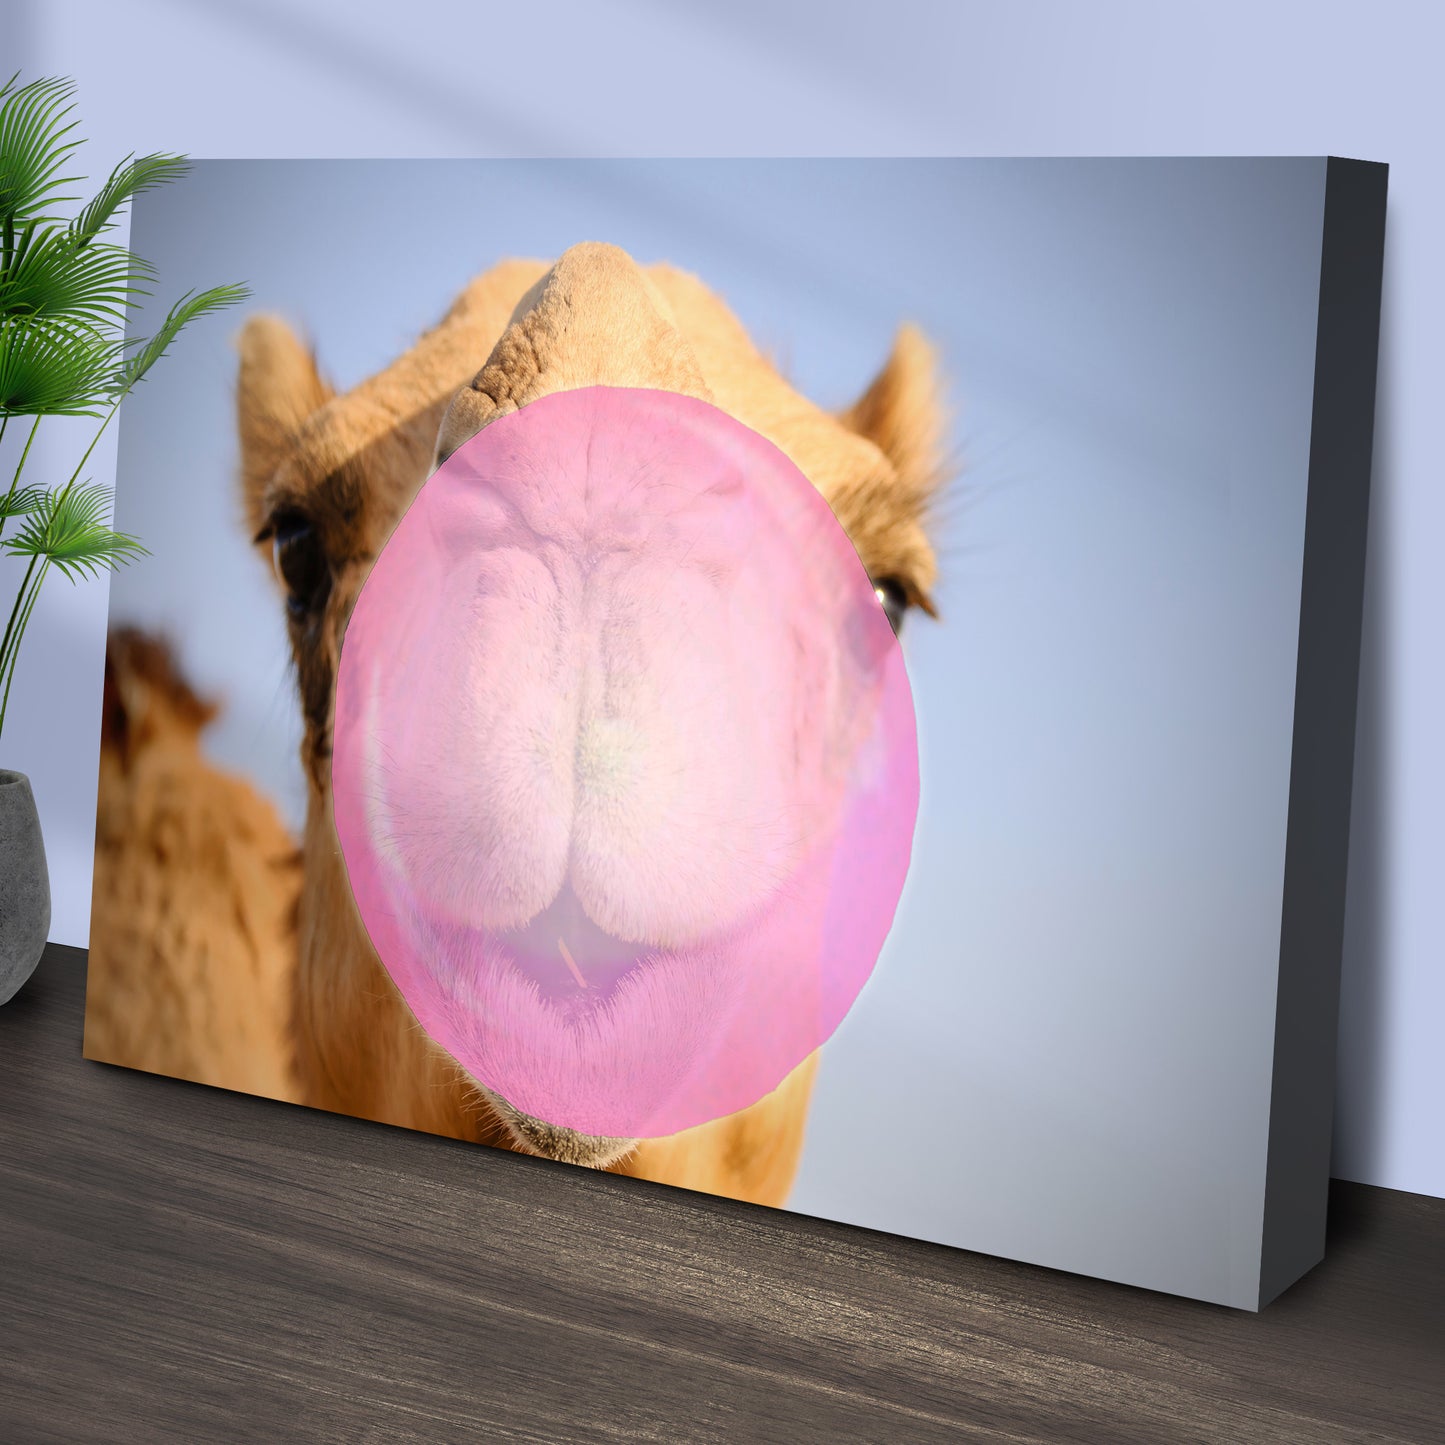 Came Bubble Gum Pop Canvas Wall Art Style 1 - Image by Tailored Canvases